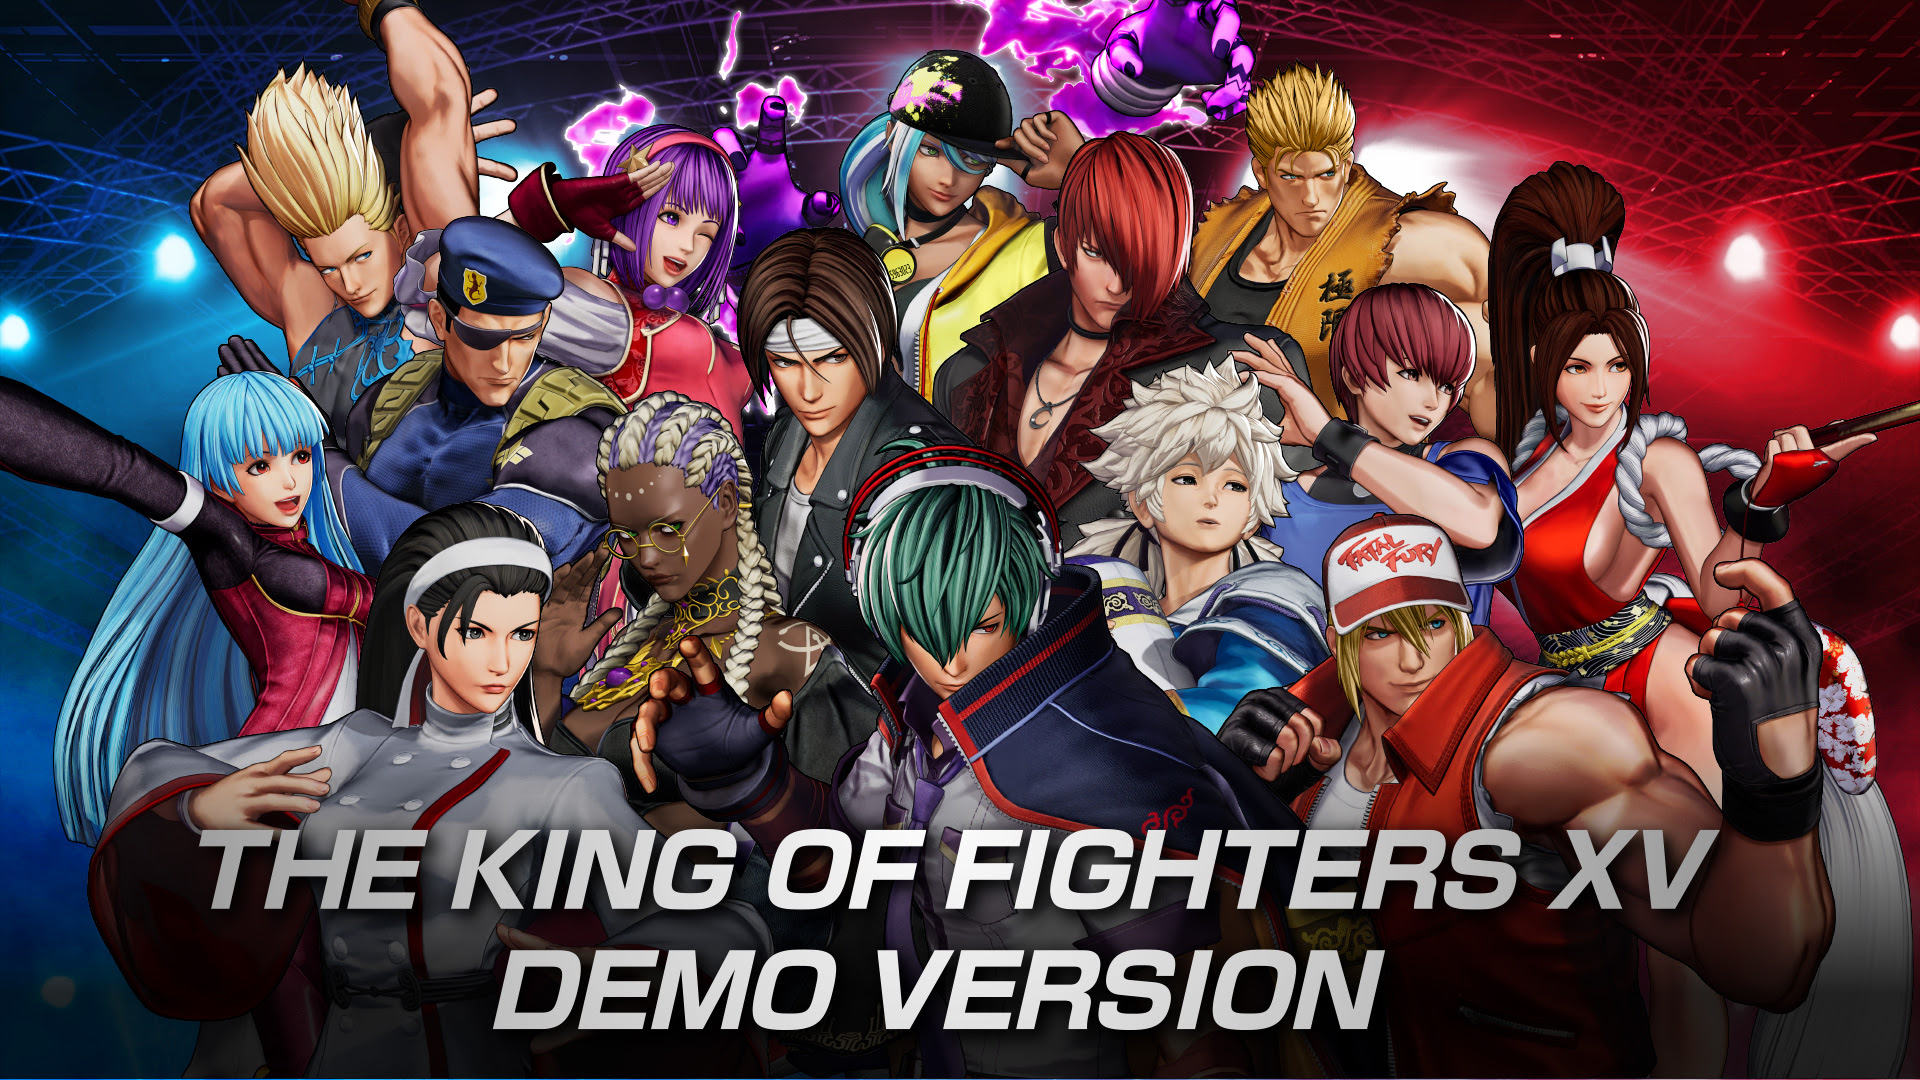 THE KING OF FIGHTERS XV Deluxe Edition Is Now Available For Xbox Series X